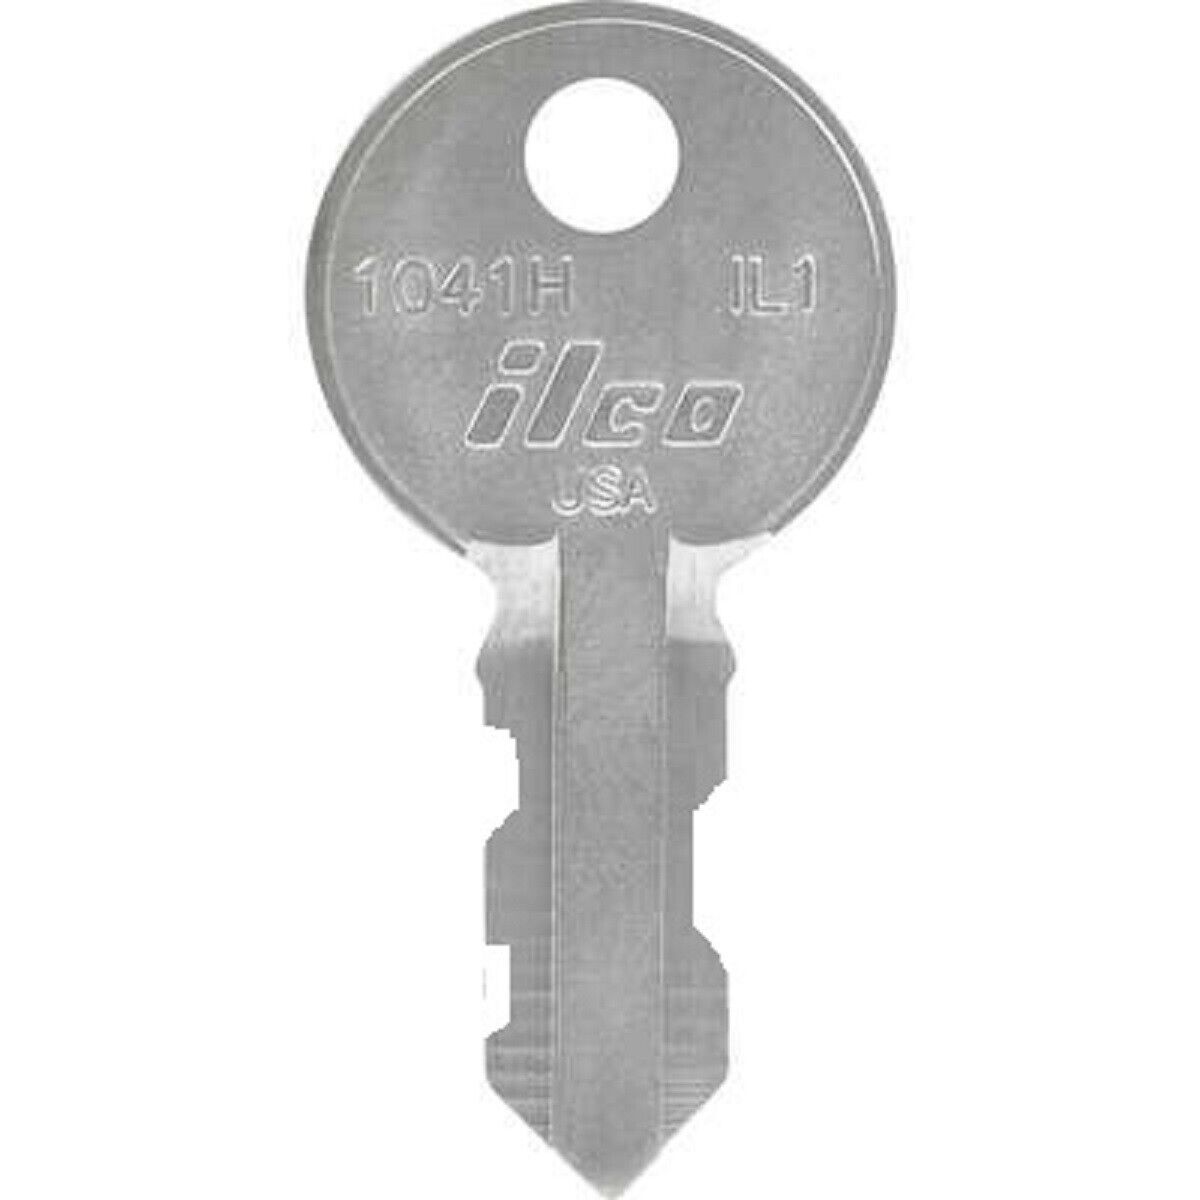 Honeywell, Guard & Classic Thermostat Co Replacement Key Mad